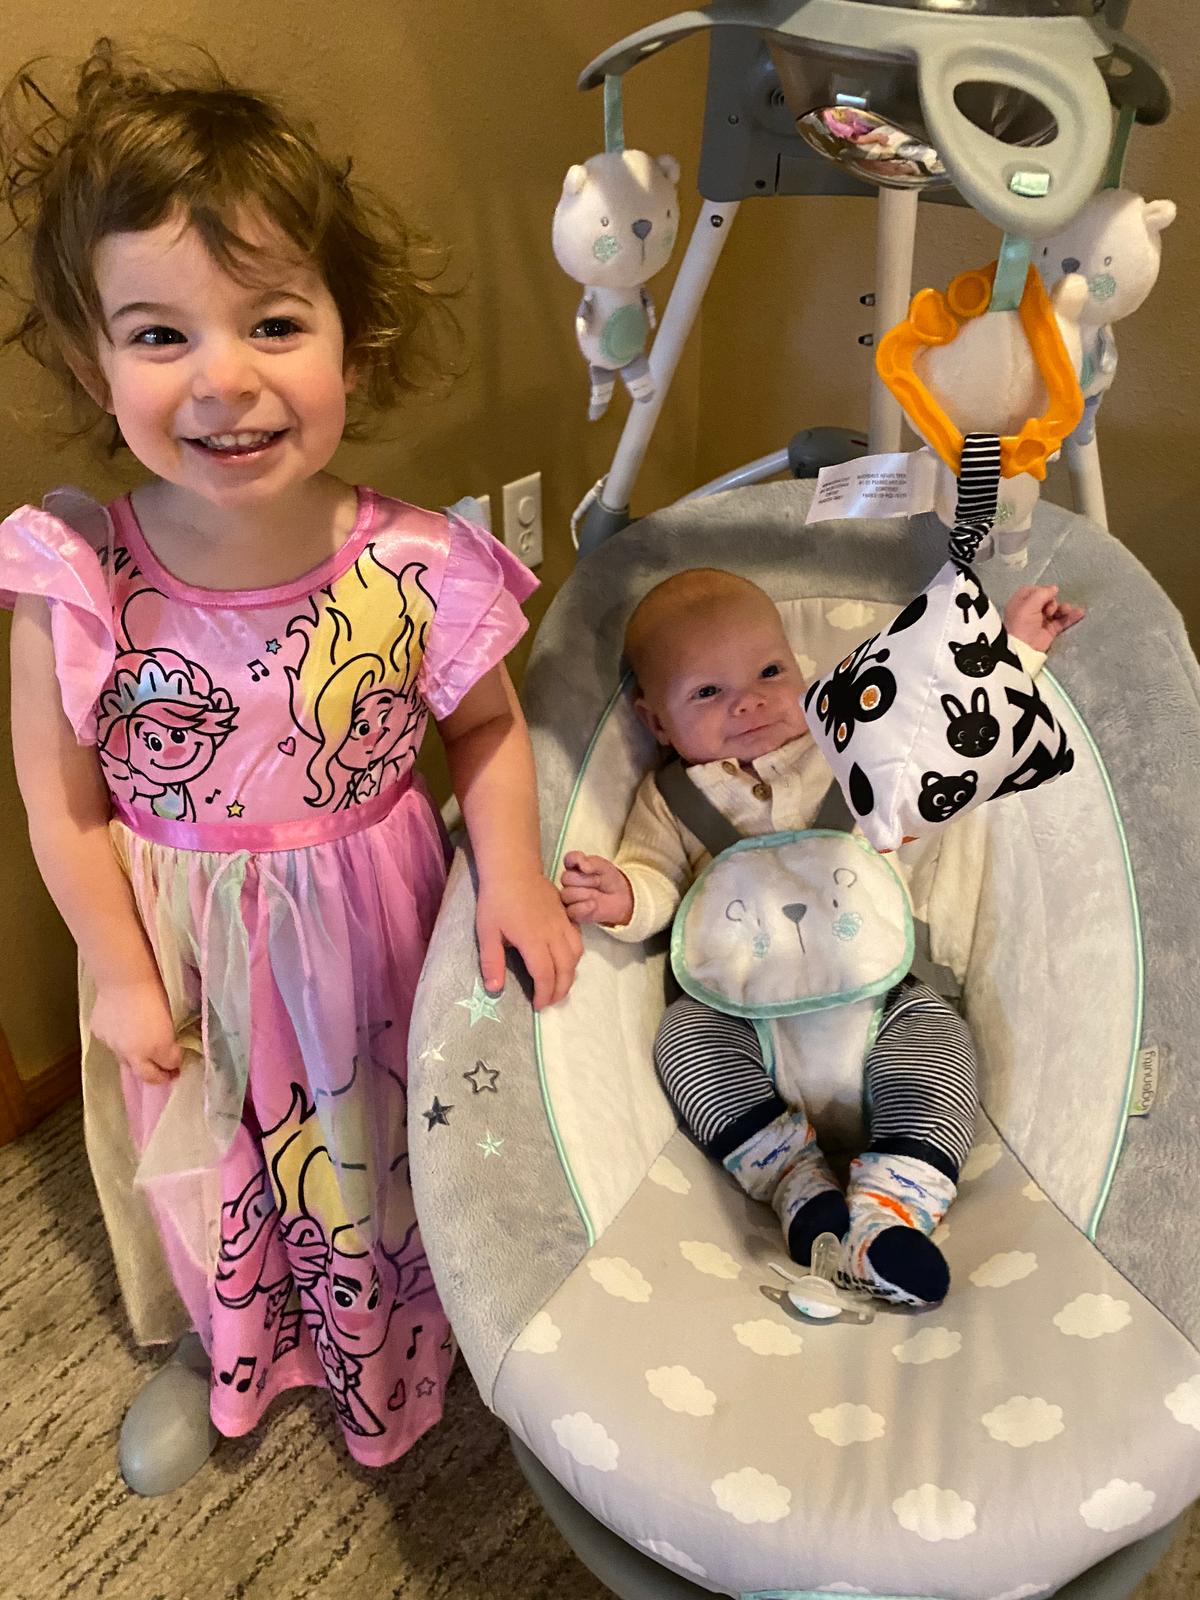 Penelope with her baby brother, Jack. (Courtesy of <a href="https://www.instagram.com/brandonhellofficial/">Brandon Hell</a>)